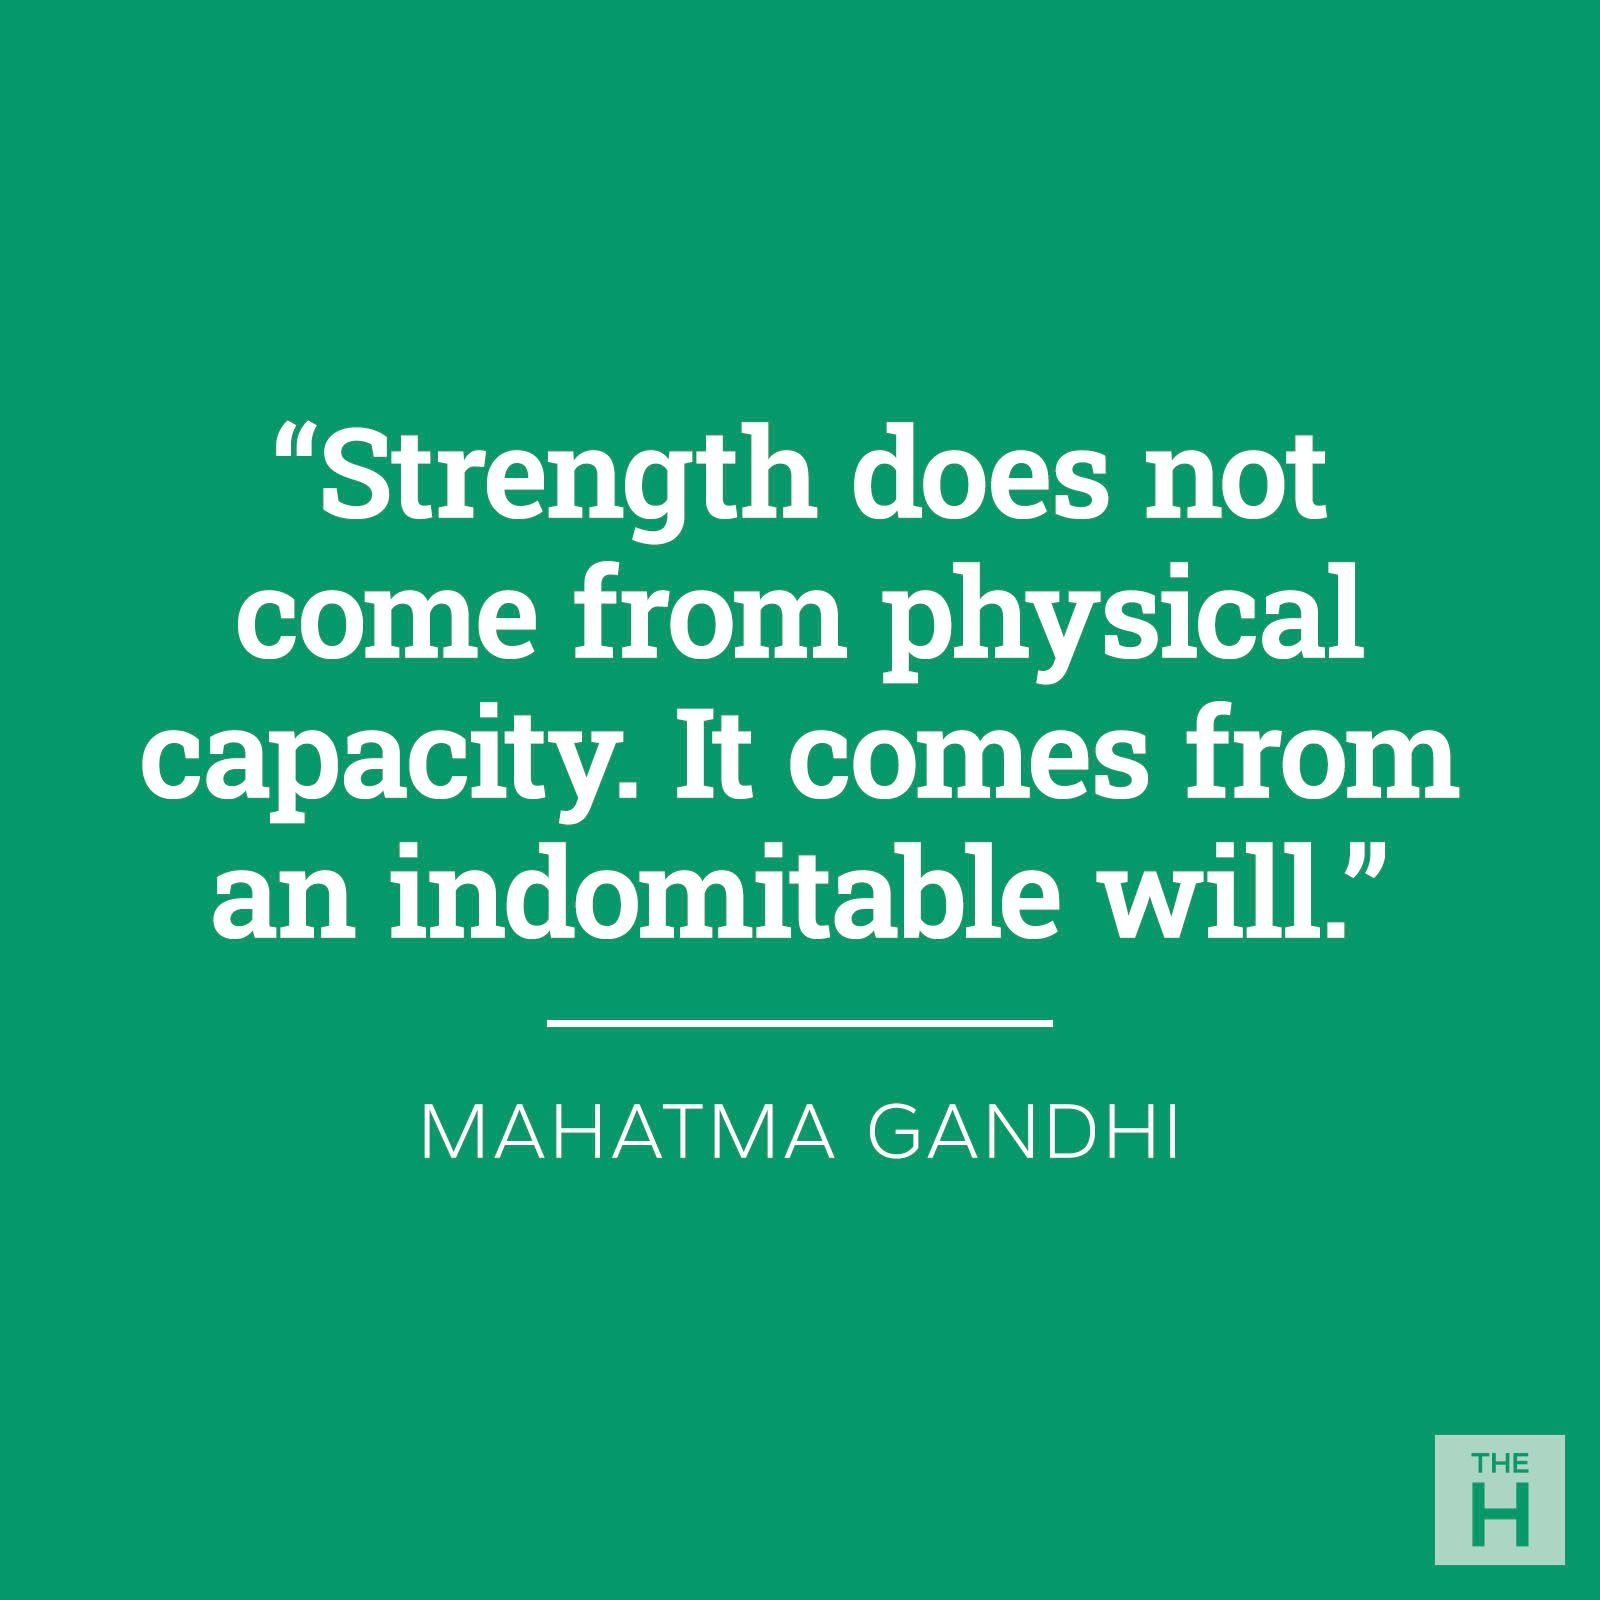 Quotes About Strength to Help You Build Resilience | The Healthy ...